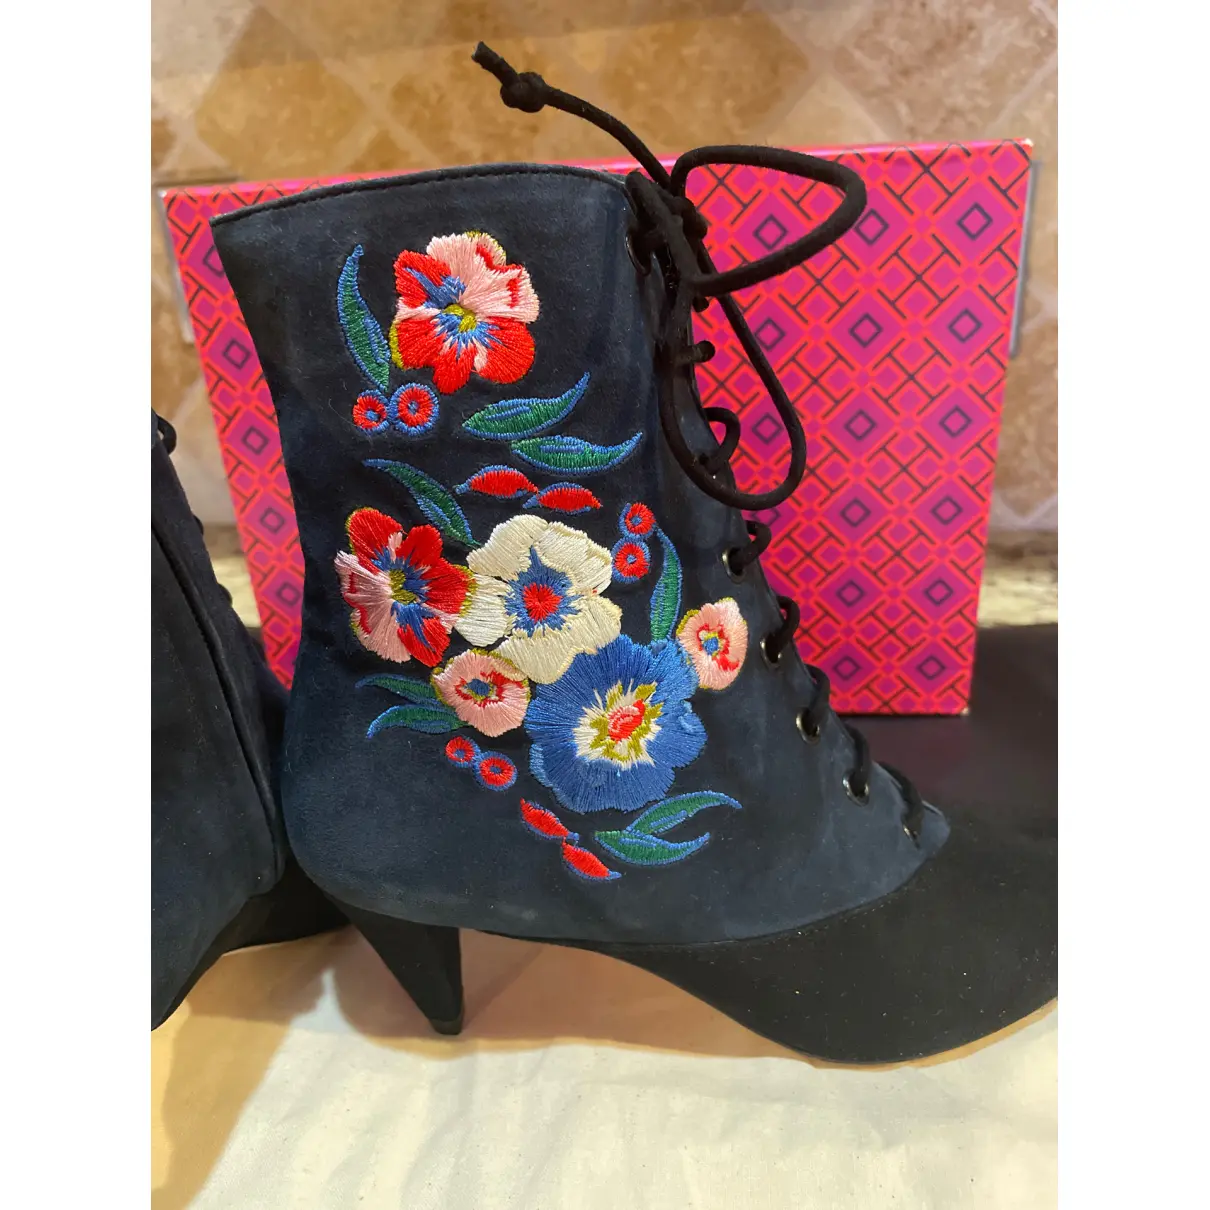 Lace up boots Tory Burch